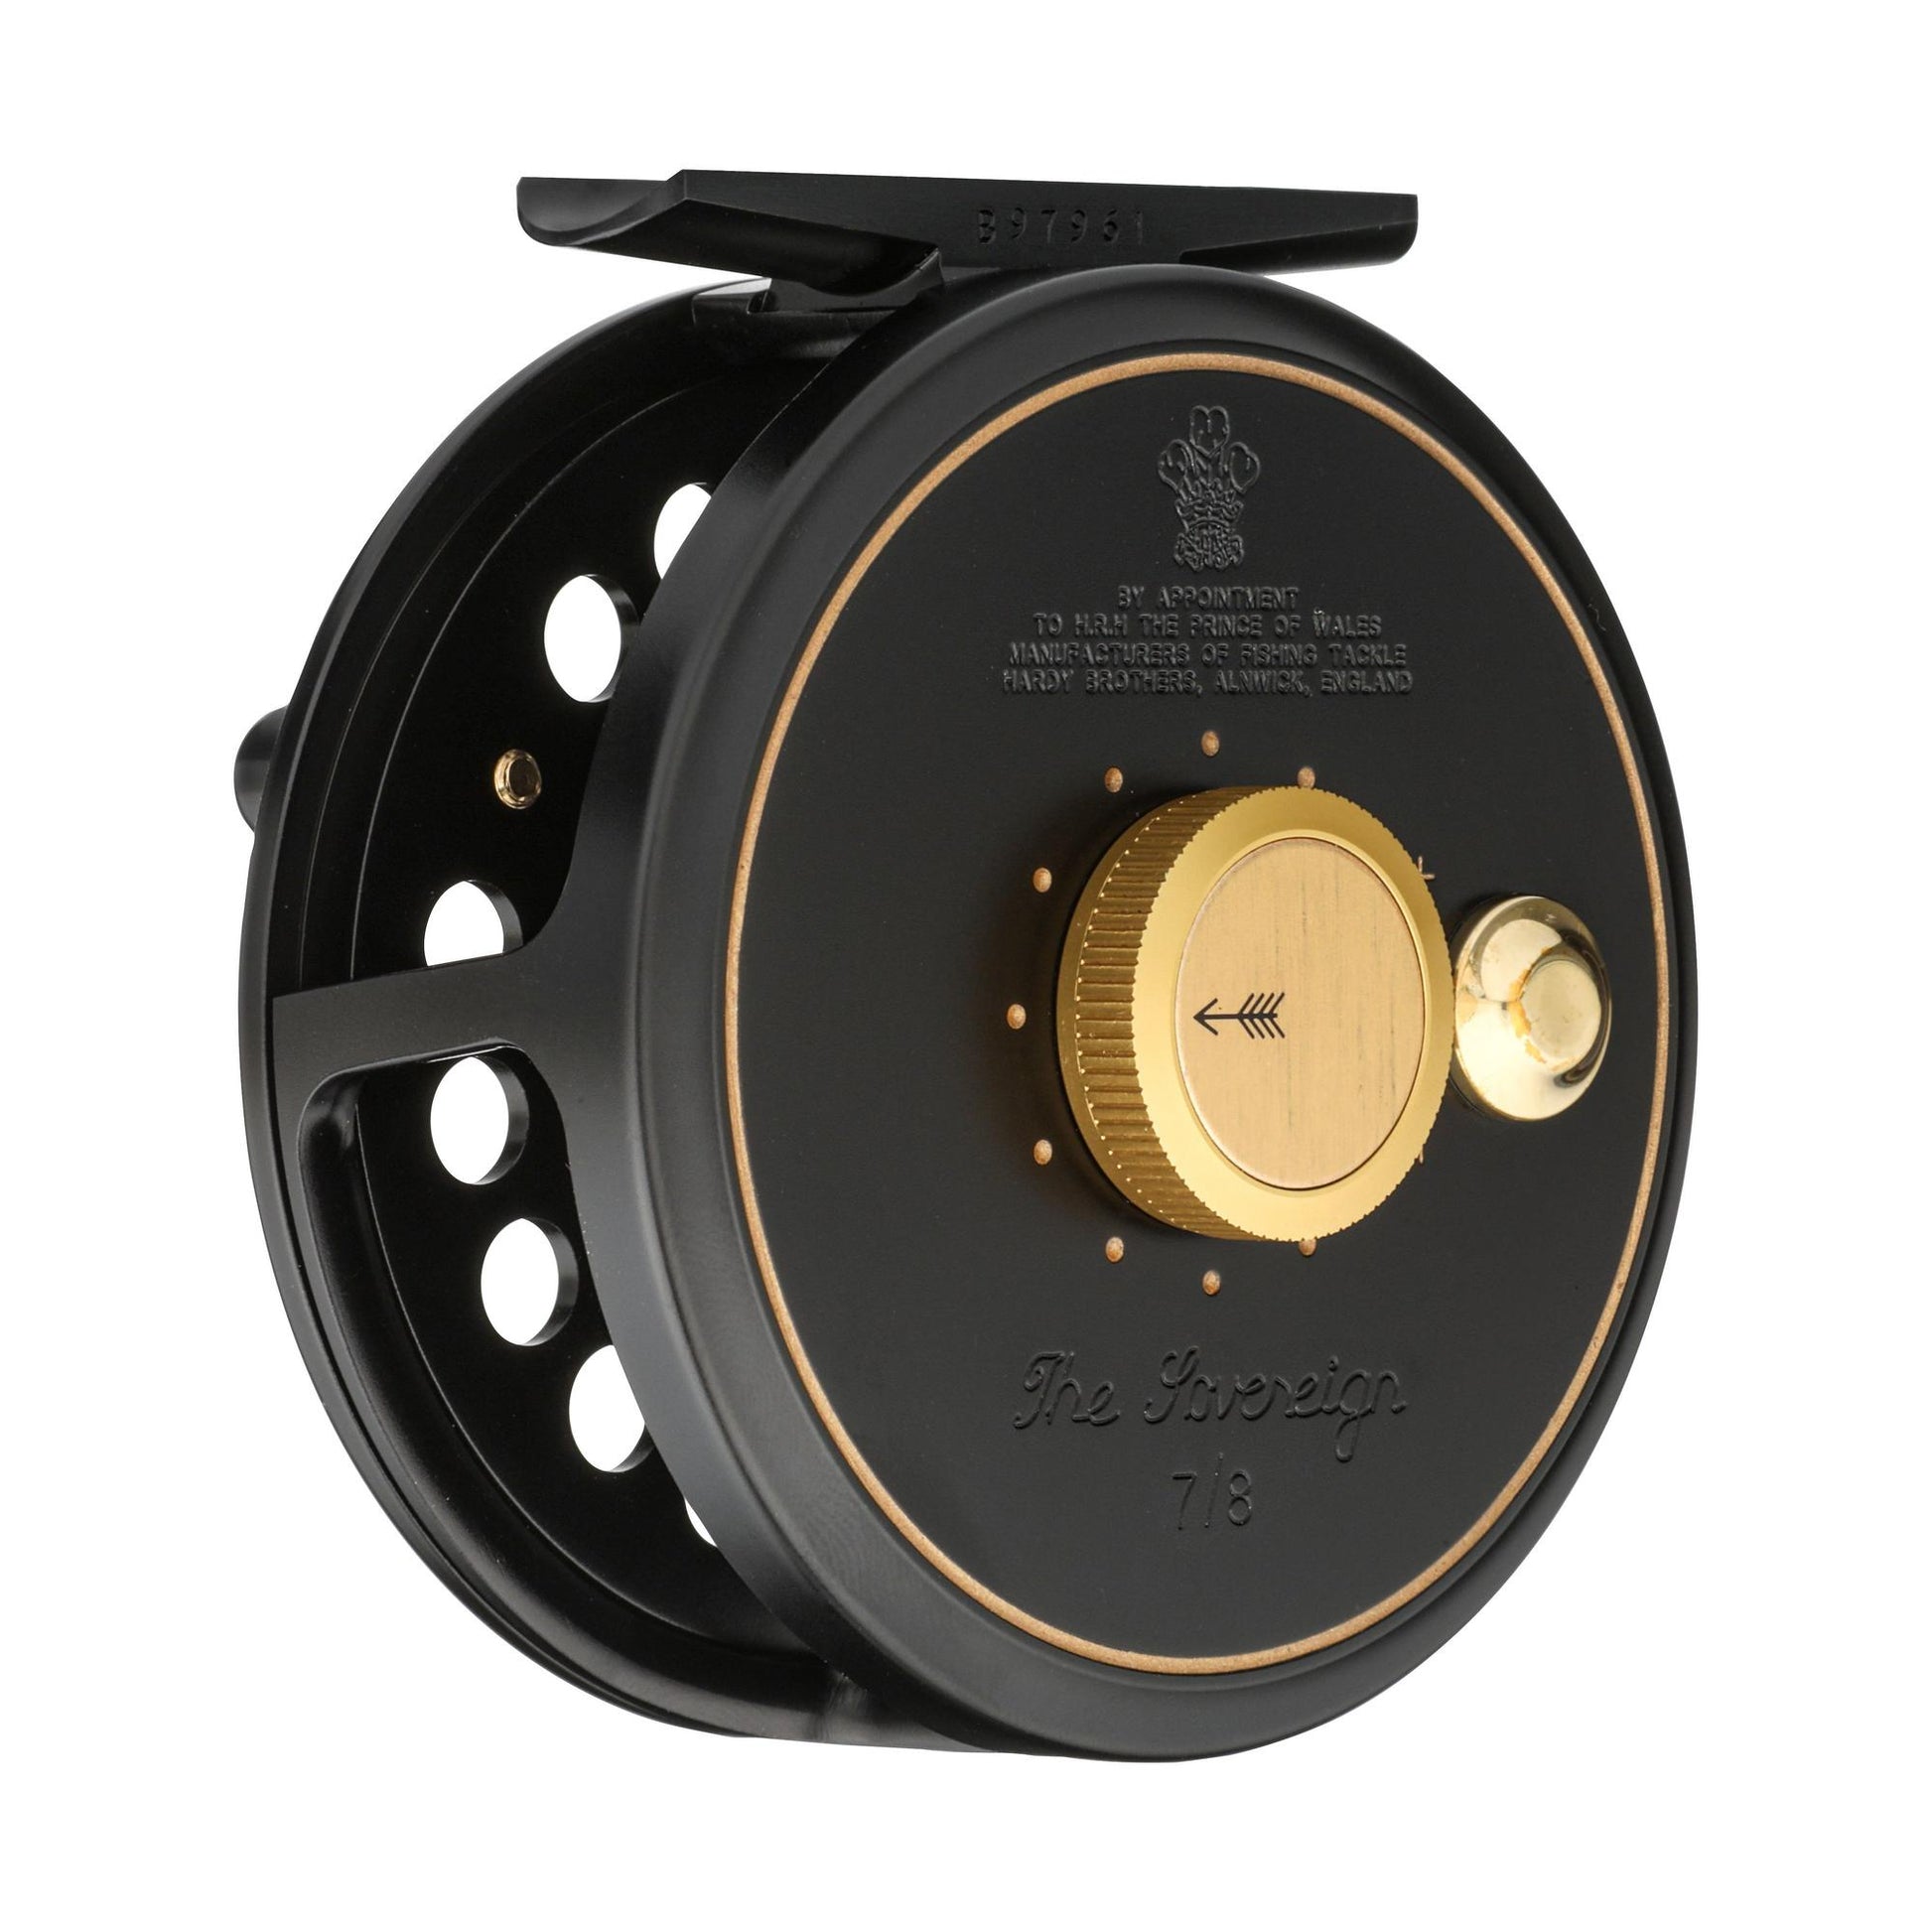 sold SCIENTIFIC ANGLERS MASTERY SERIES 6-7wt FLY REEL, ENGLAND